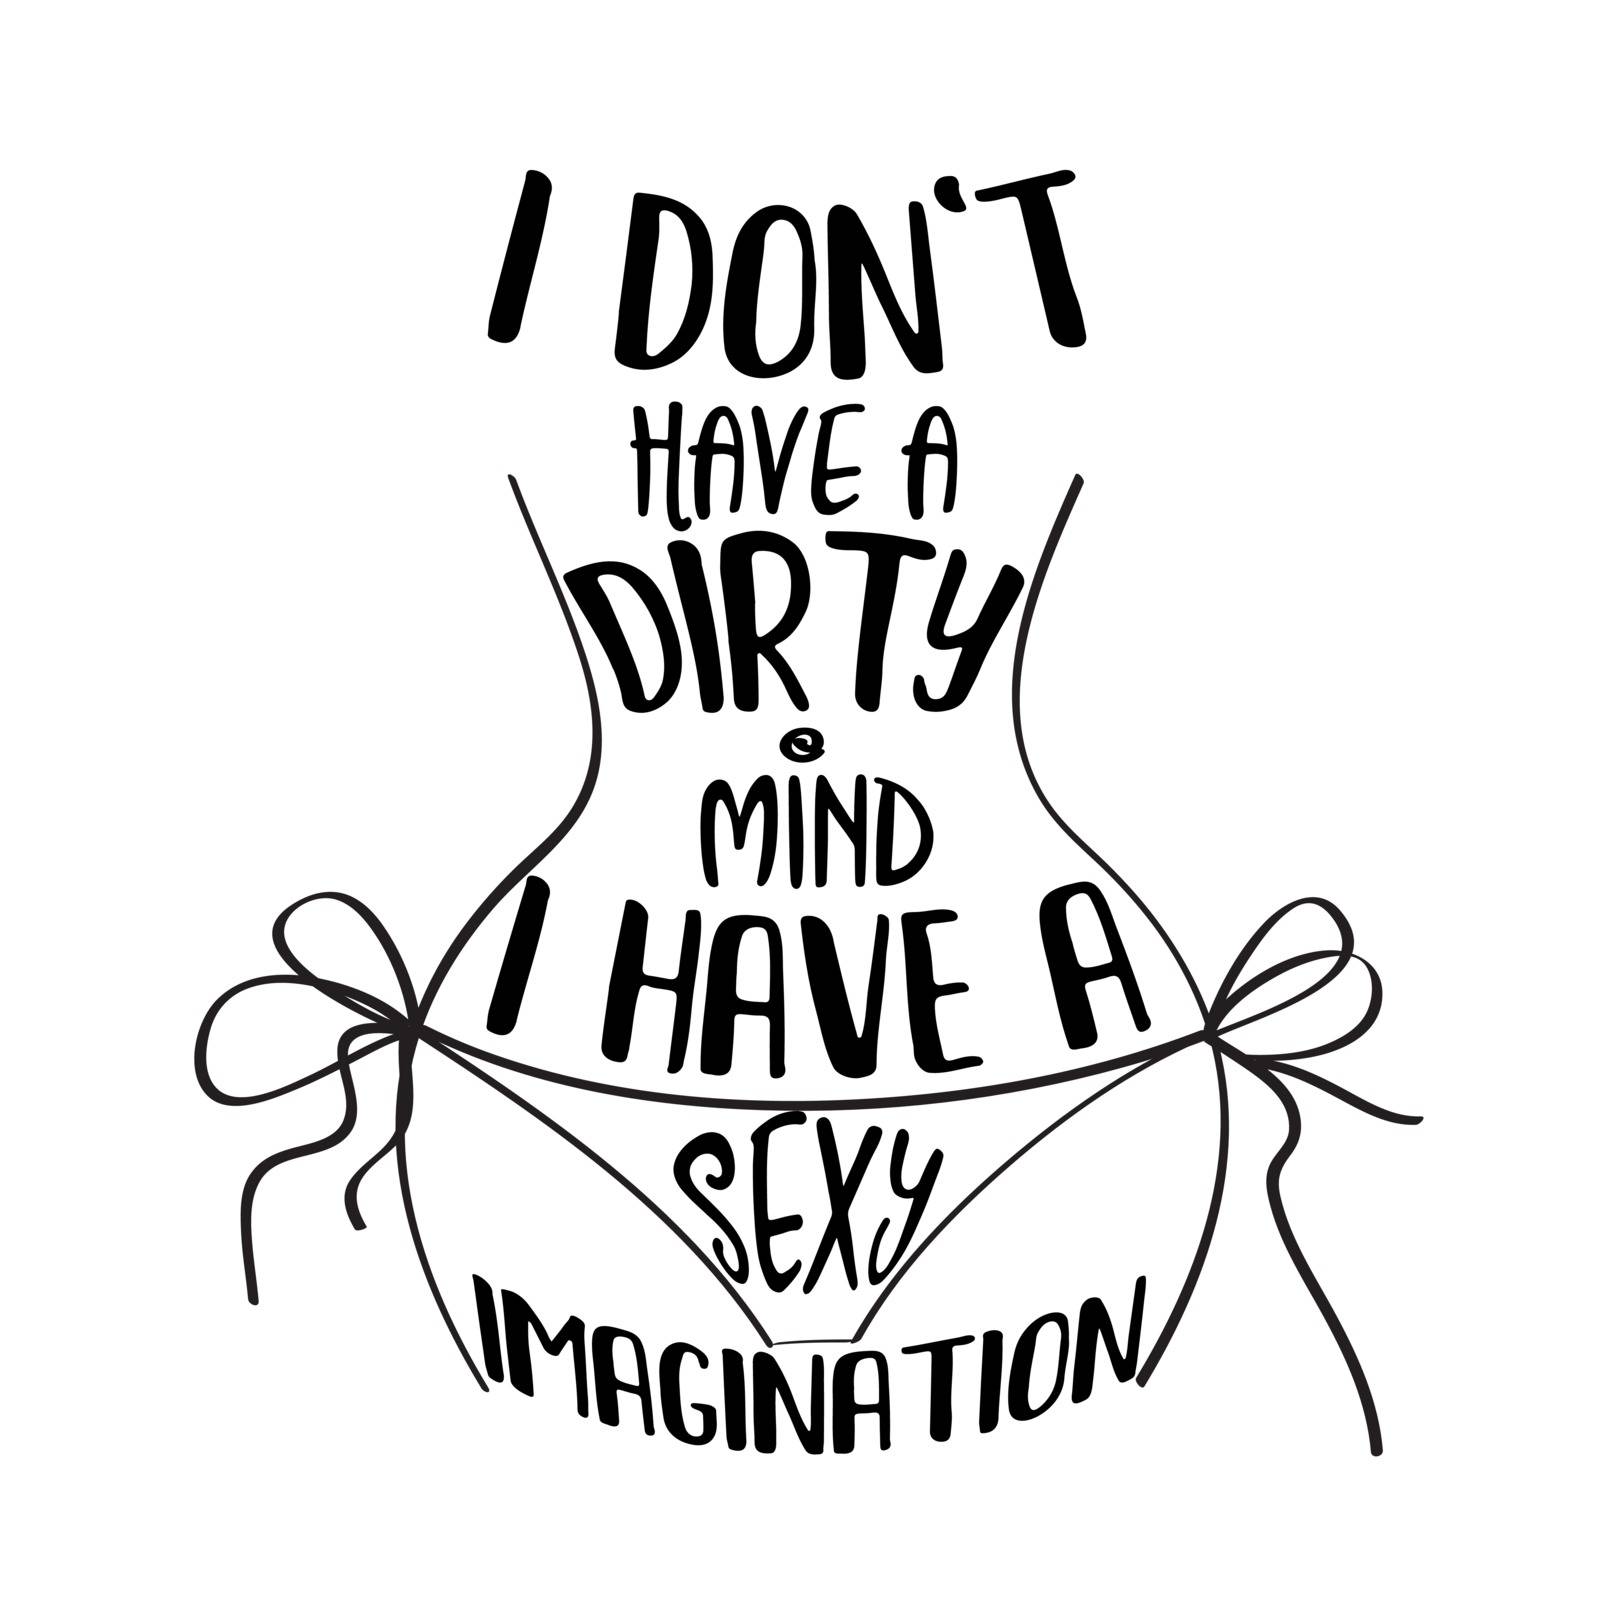 Funny quote " I don't have a dirty mind, I have a sexy imagination"